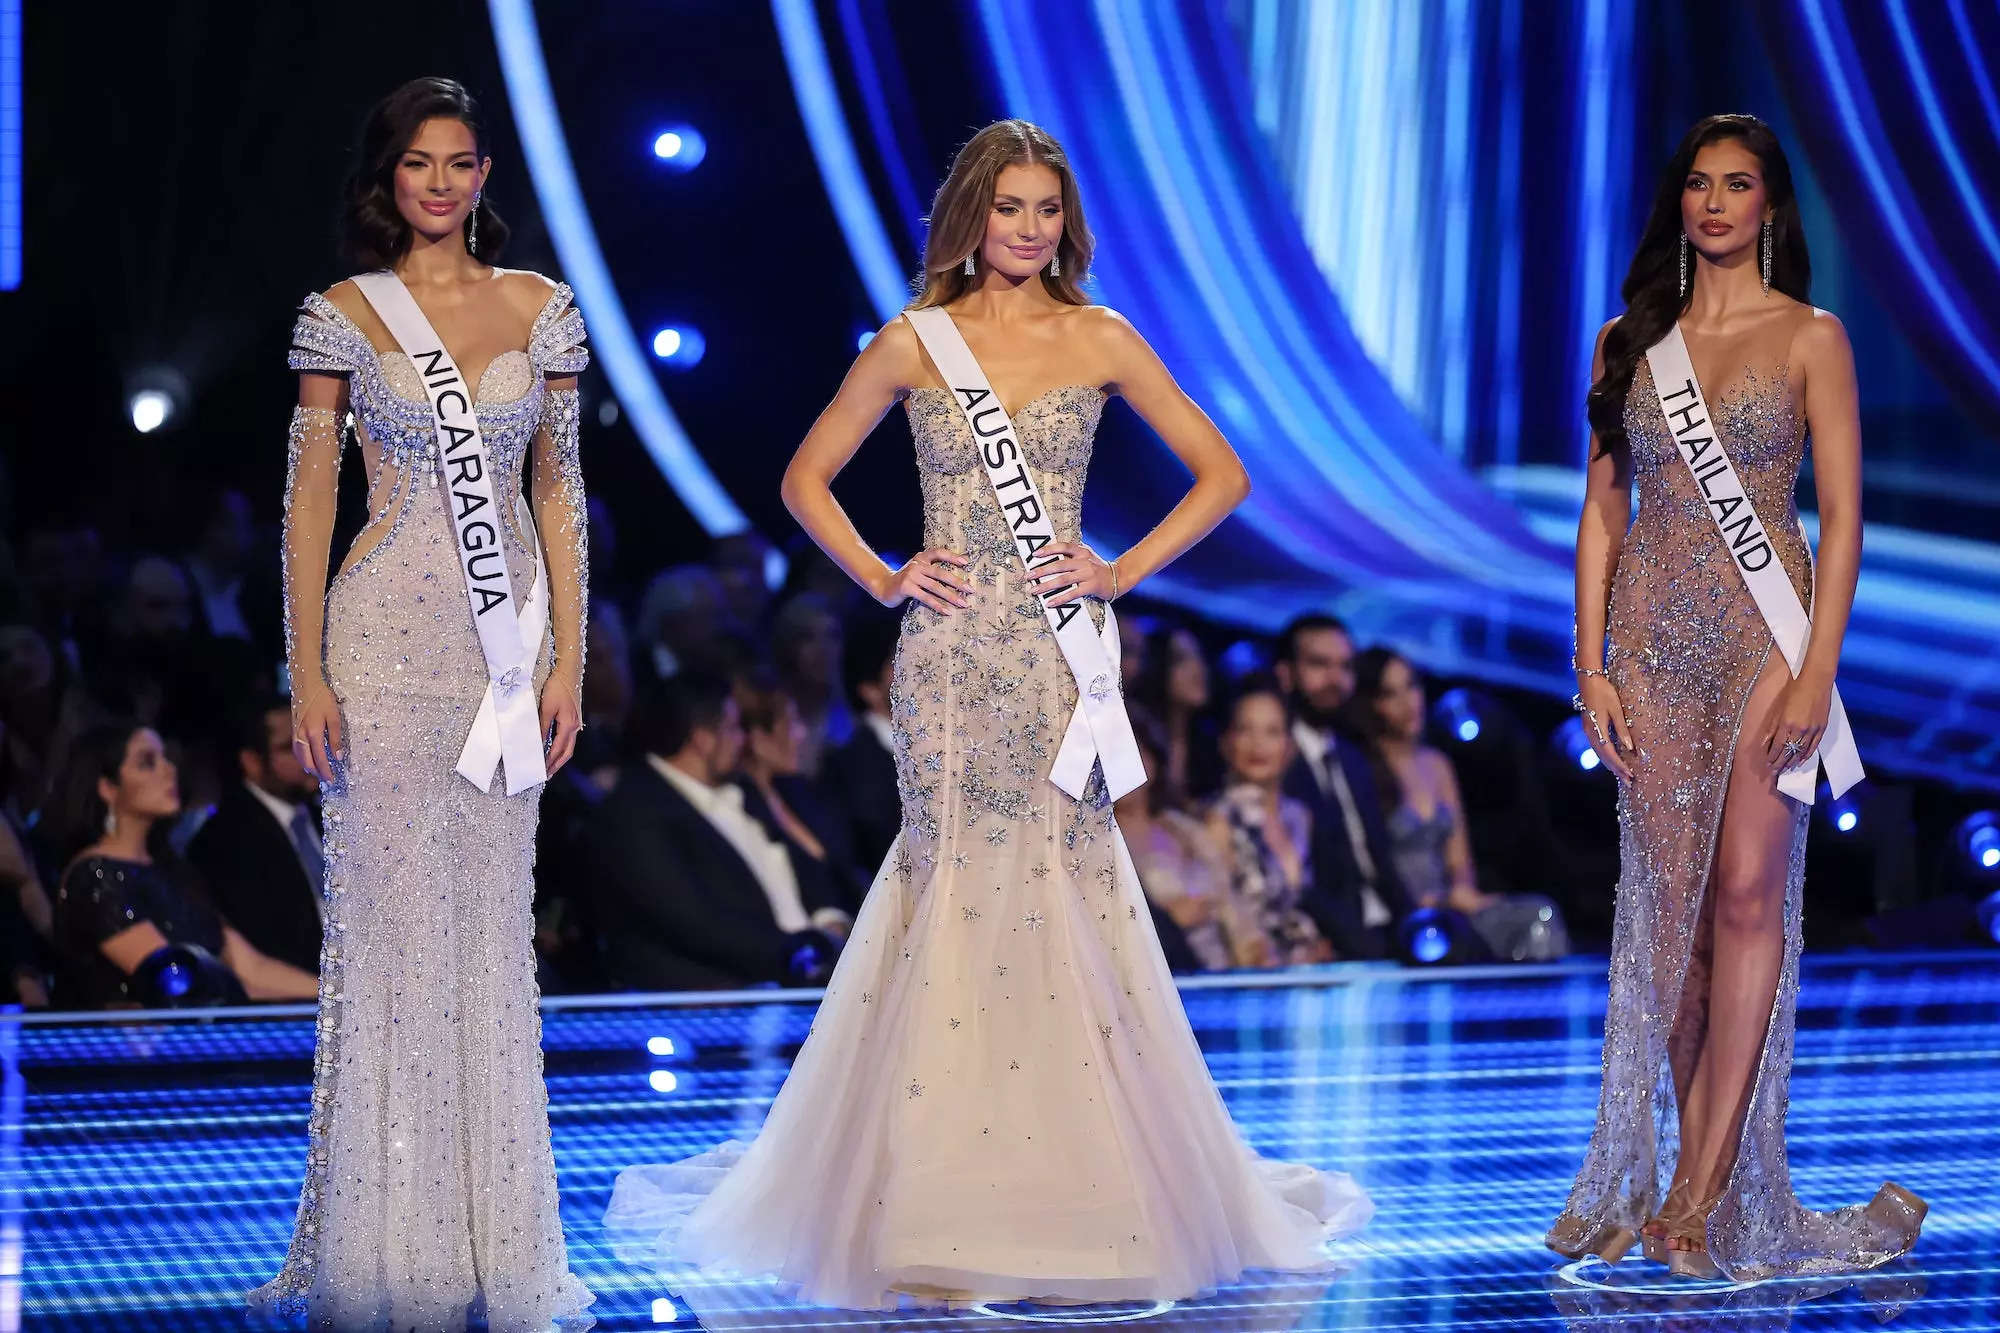 Miss Nicaragua has been crowned the winner of Miss Universe for the